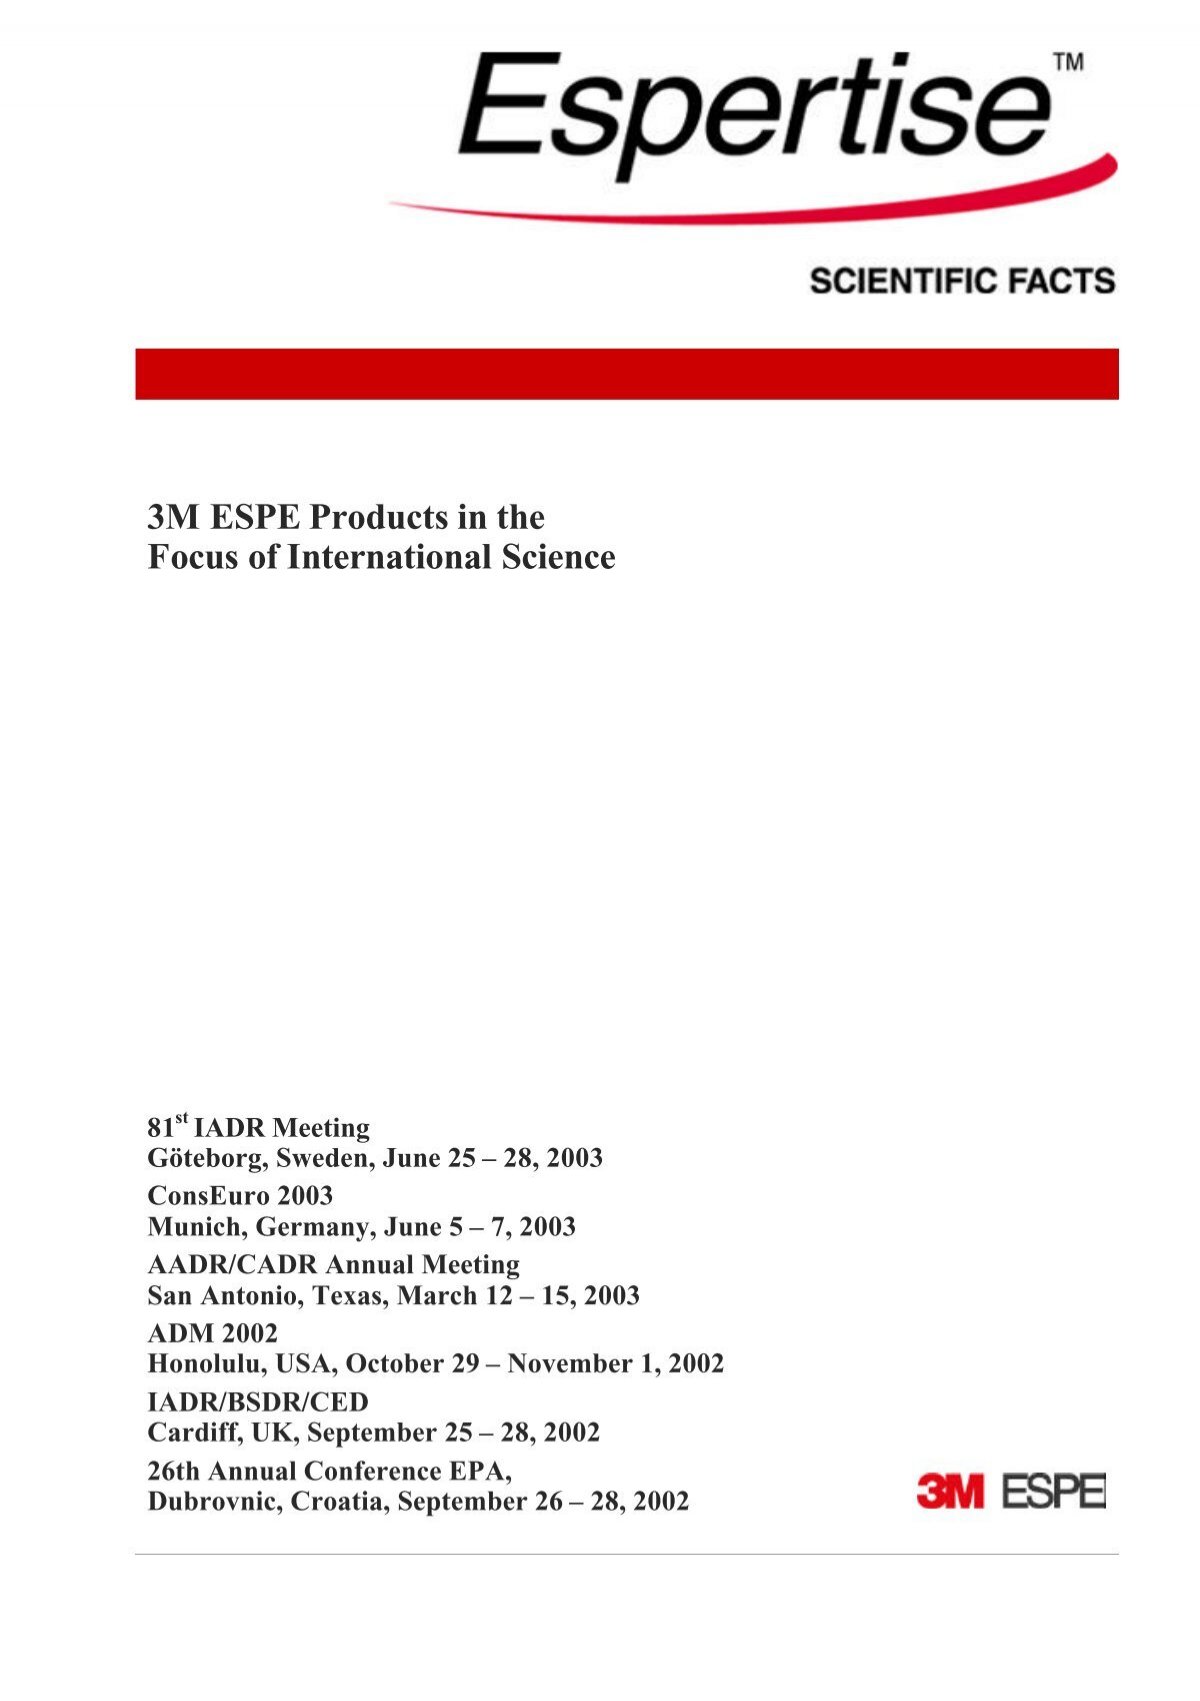 3M ESPE Products in the Focus of International Science